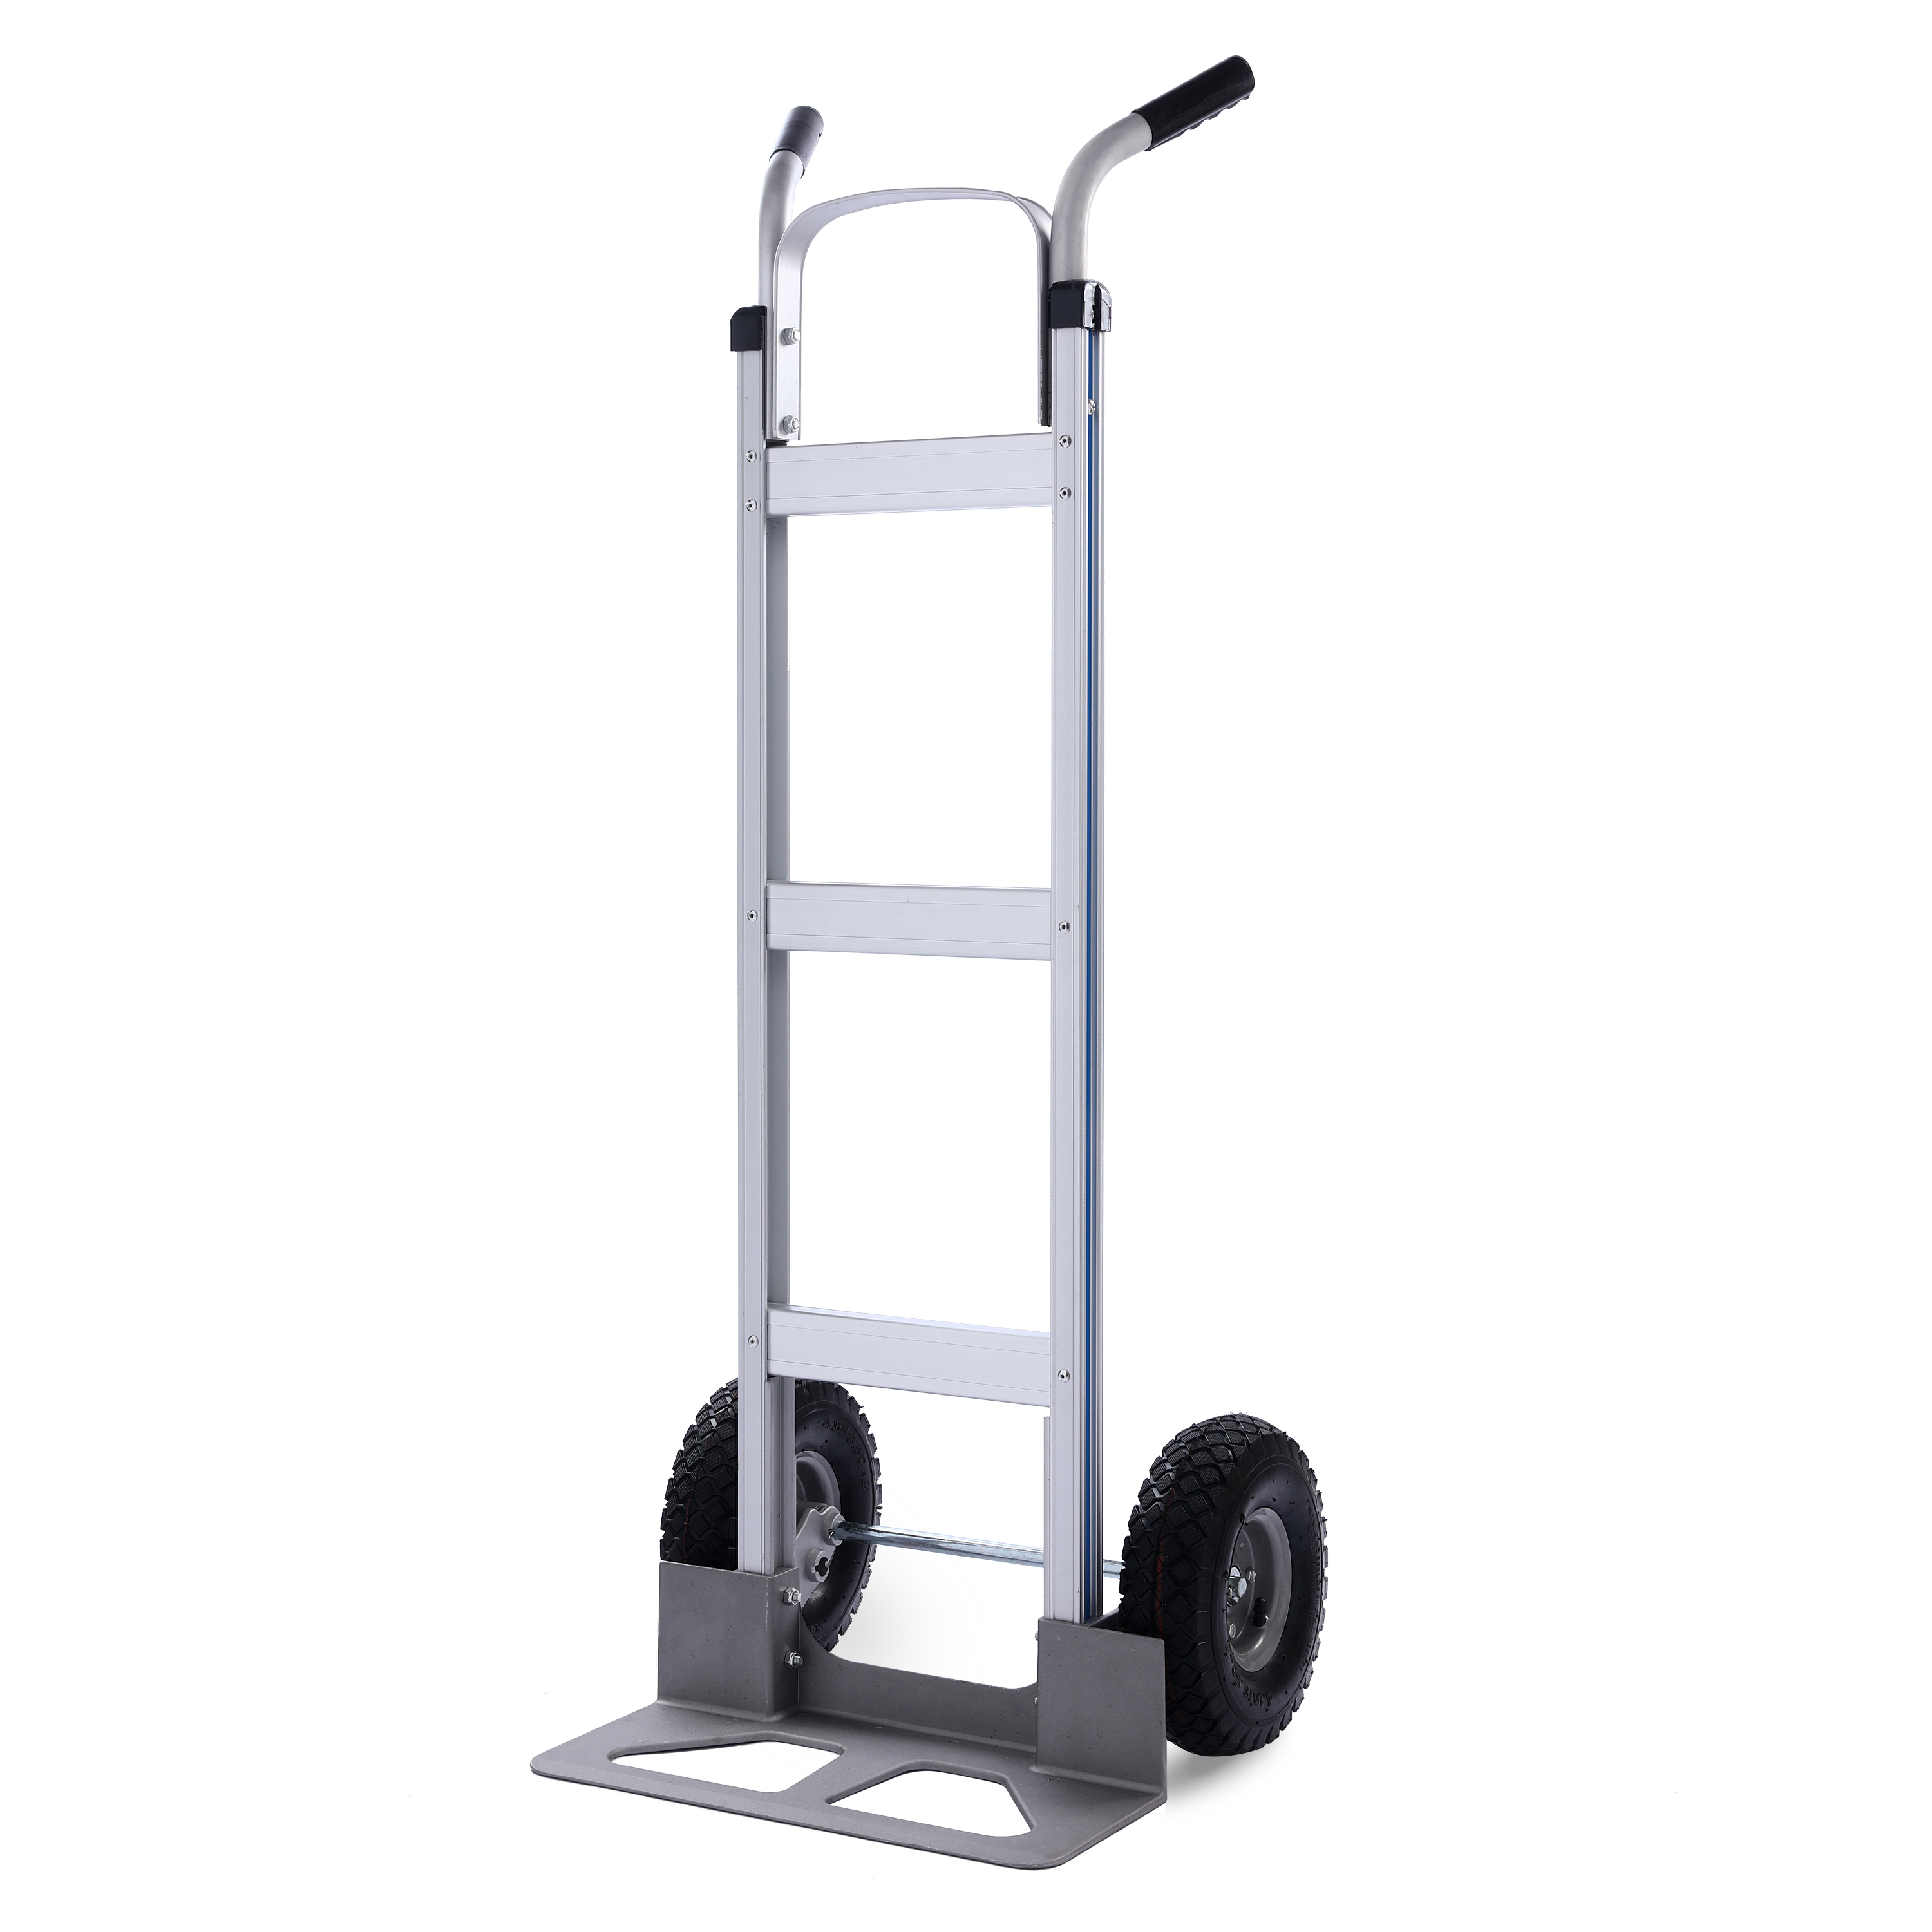 LEADALLWAY Platform Truck Hand Truck Large Size Foldable Dolly Cart for Moving Easy Storage and 360 Degree Swivel Wheels 880lbs Weight CAPA